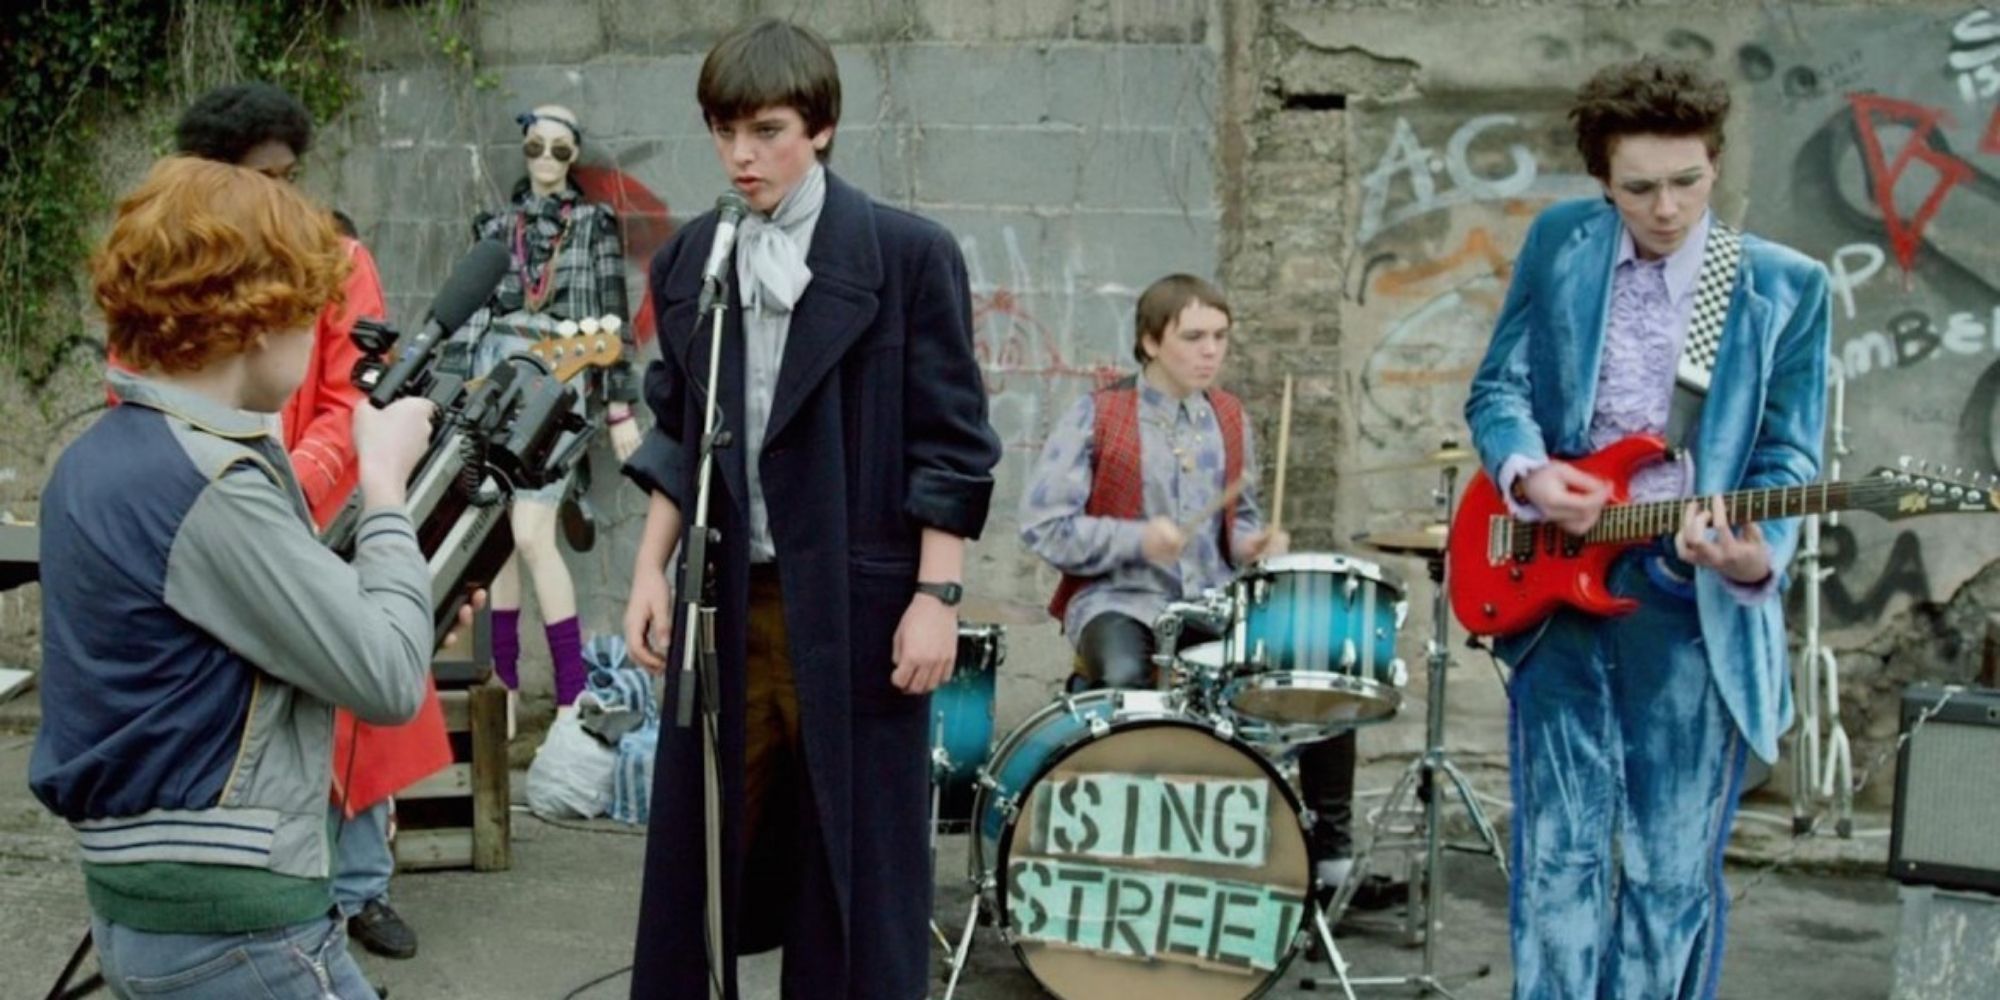 The Sing Street Band shooting a music video on Sing Street